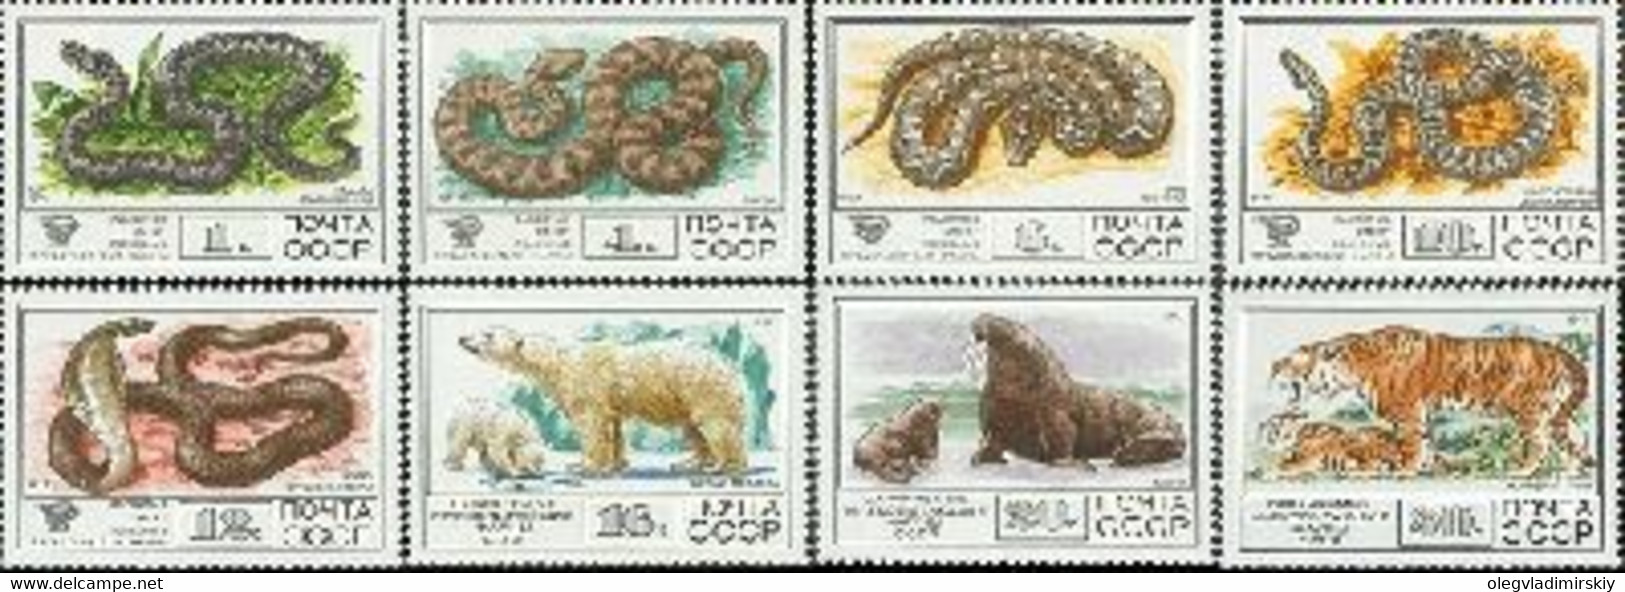 USSR Russia 1977 Rare Fauna Of The USSR Snackes Tiger White Bear Walrus Set Of 8 Stamps - Nuevos